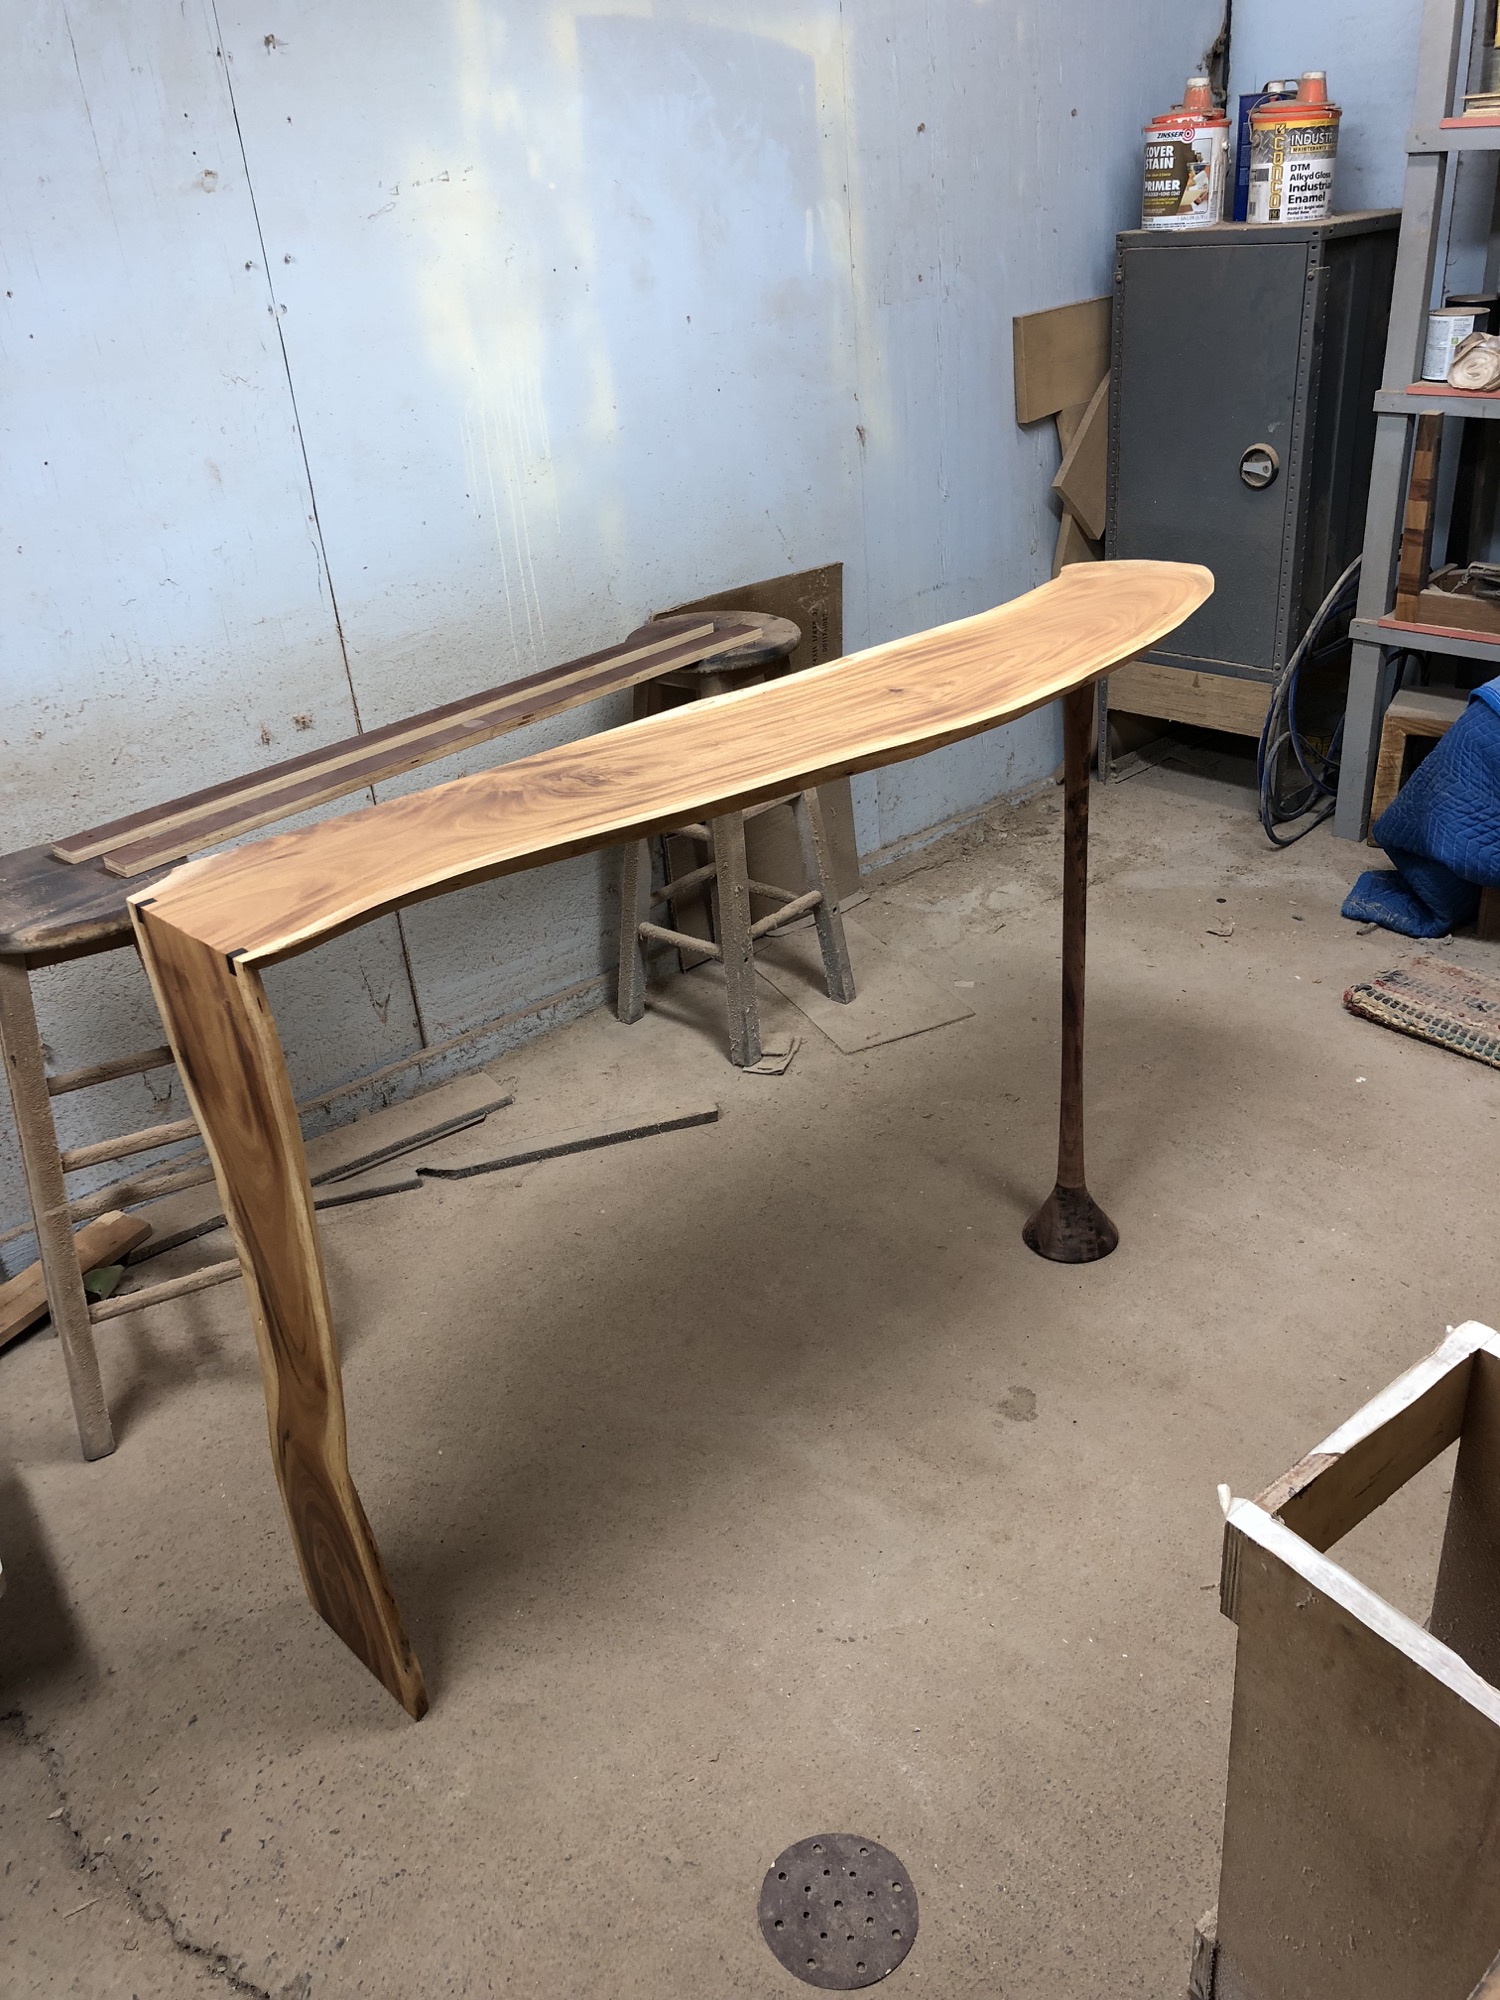  I was so excited to get the leg underneath the table and see what they looked like together. I haven't seen anything quite like it before, and at first I wasn't sure if I even liked it. Over the first few hours of looking at it, the design grew on m